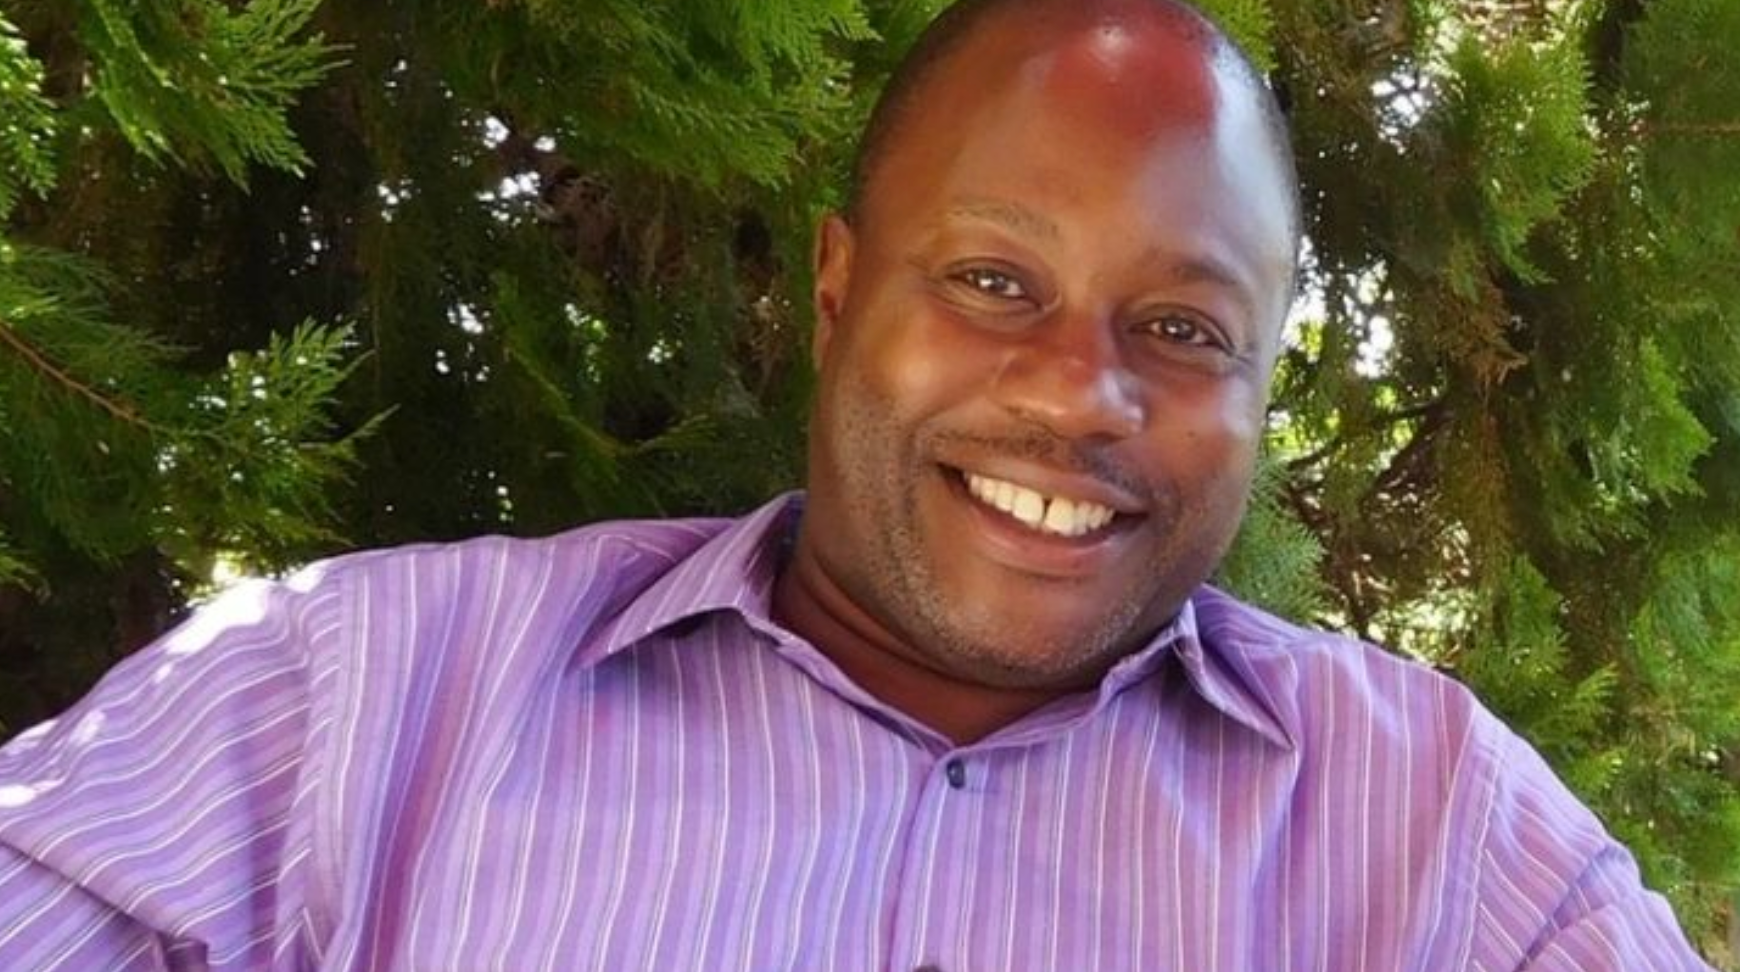 george ziwa - support the fund to repatriate body for funeral in Africa